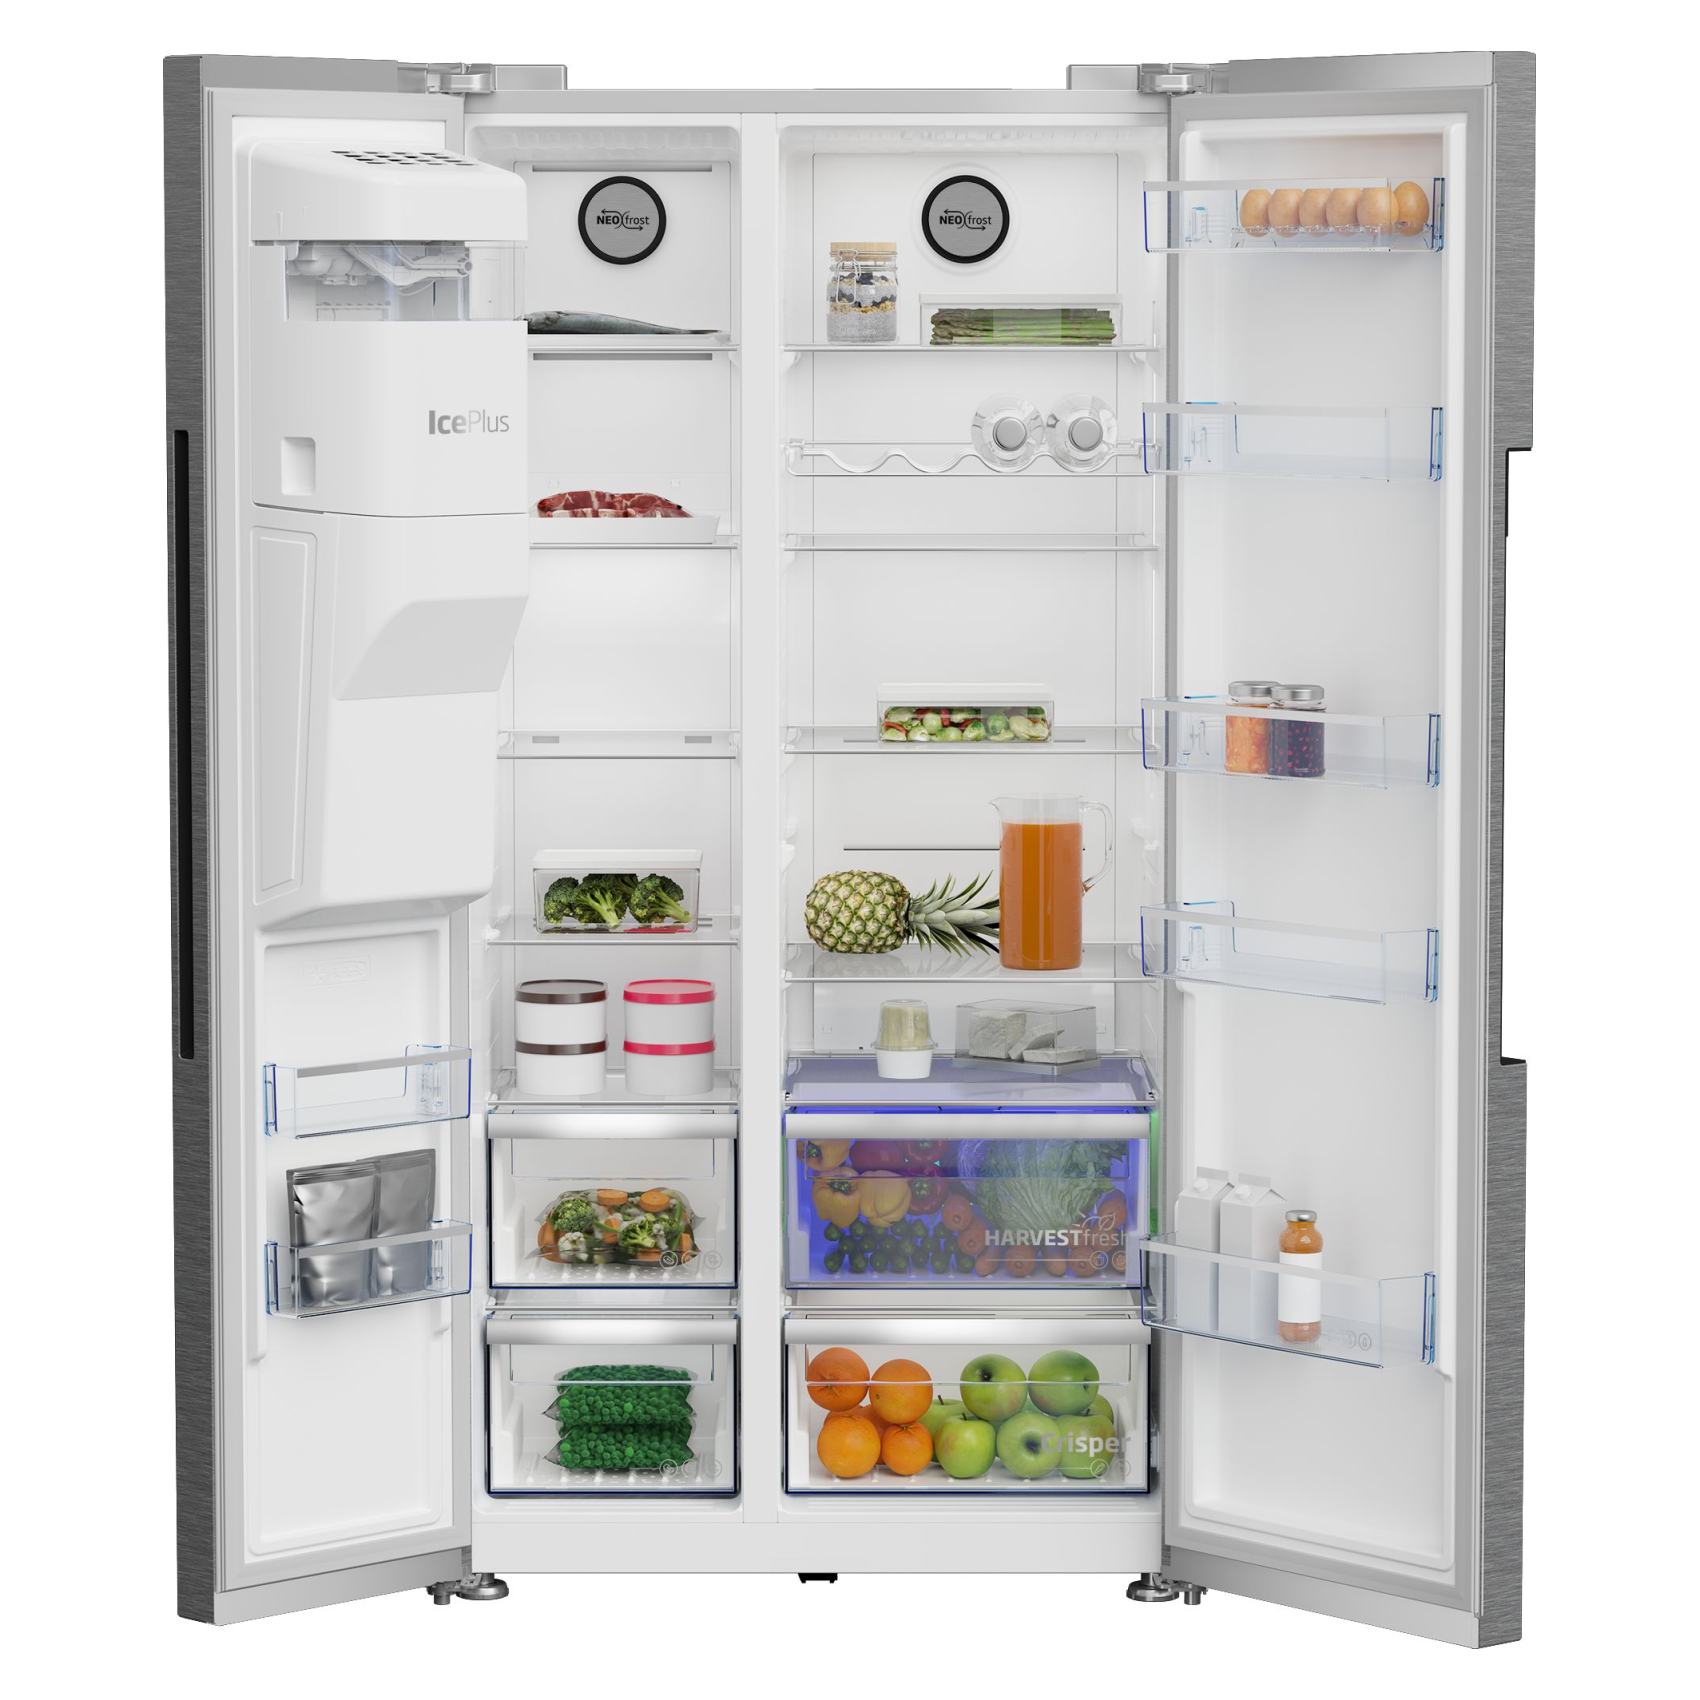 Beko 651 Ltr Side By Side Refrigerator 179X91 Cm, HarvestFresh, NeoFrost Dual Cooling, ProSmart Inverter Compressor, FastIce, With Automatic Ice Machine, Brushed Silver - GNE753DX, 1 Year Warranty